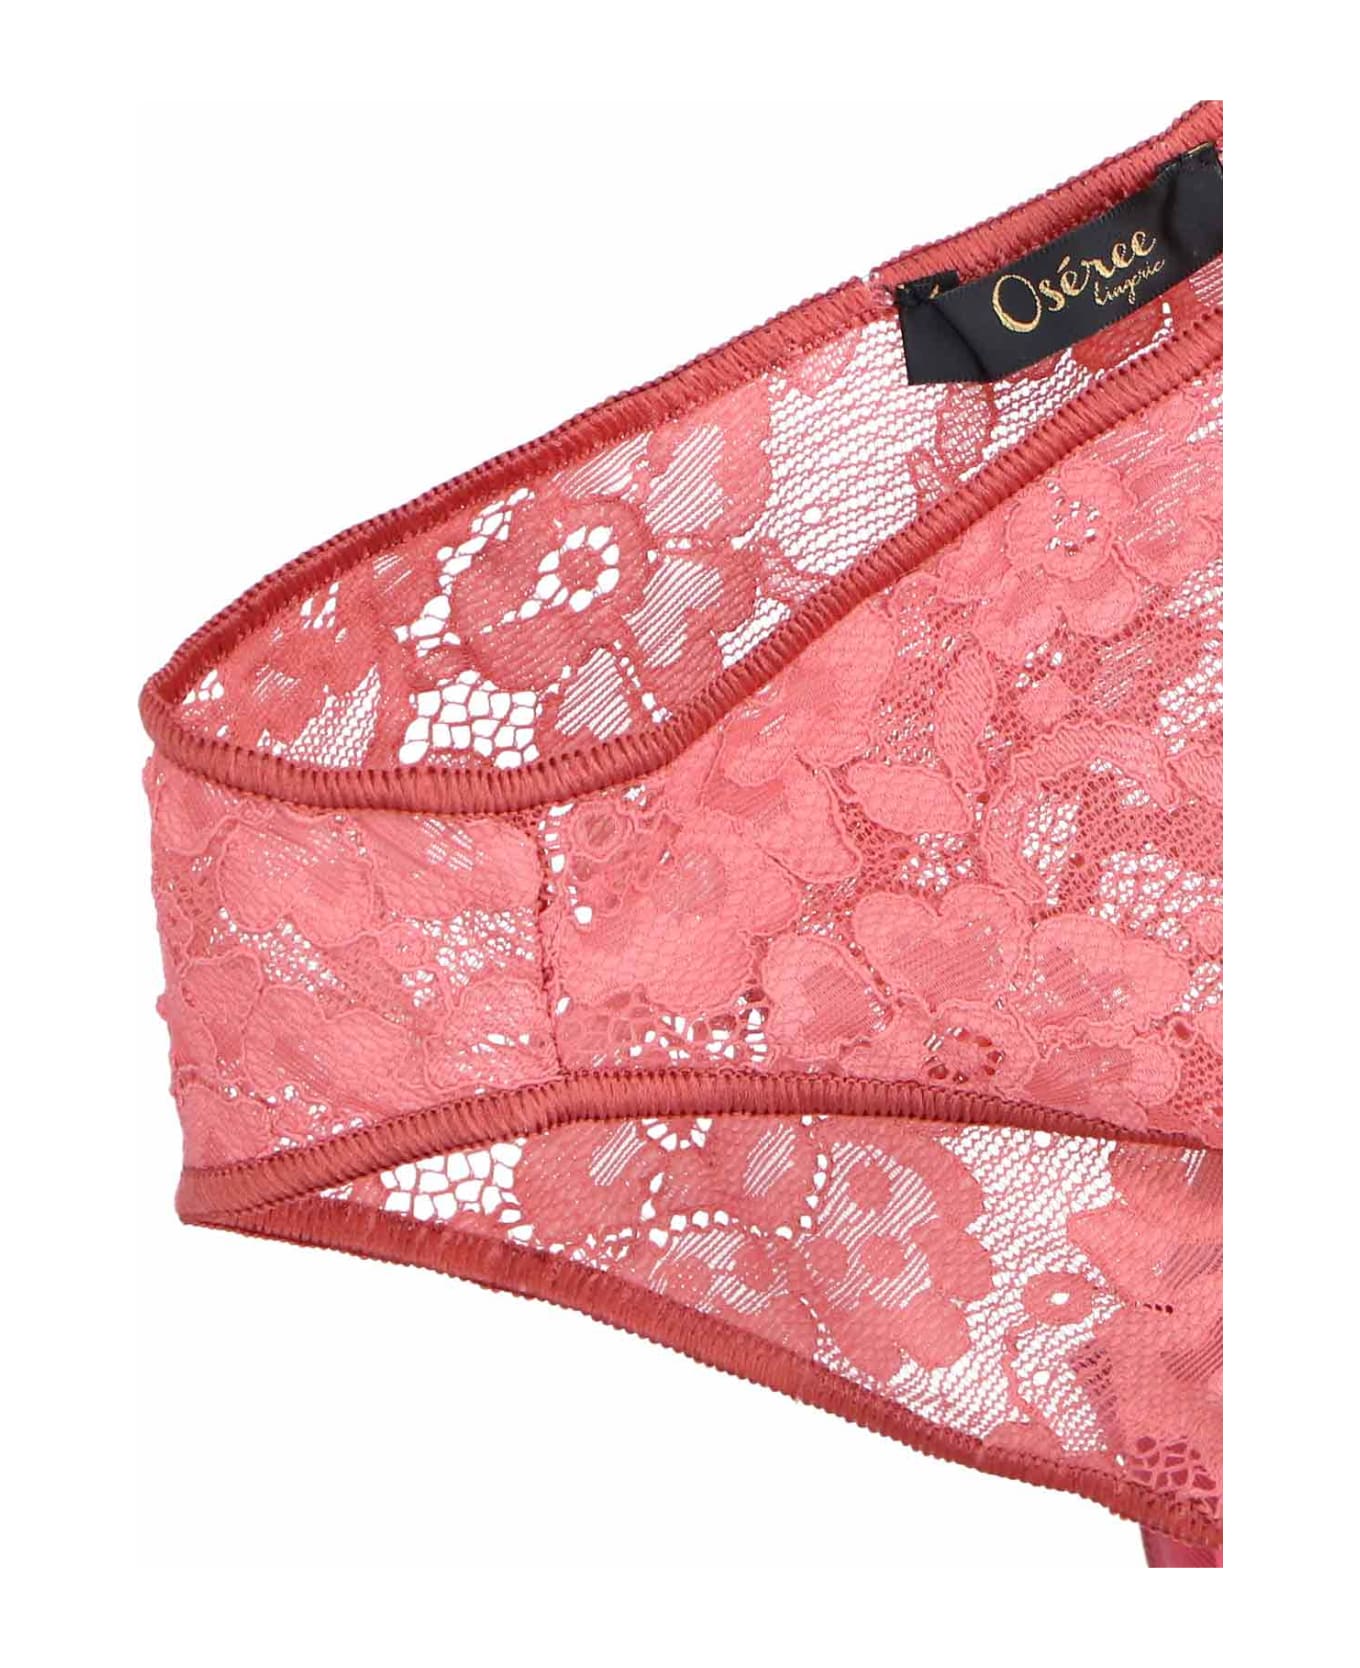 Oseree Lace Briefs - Pink